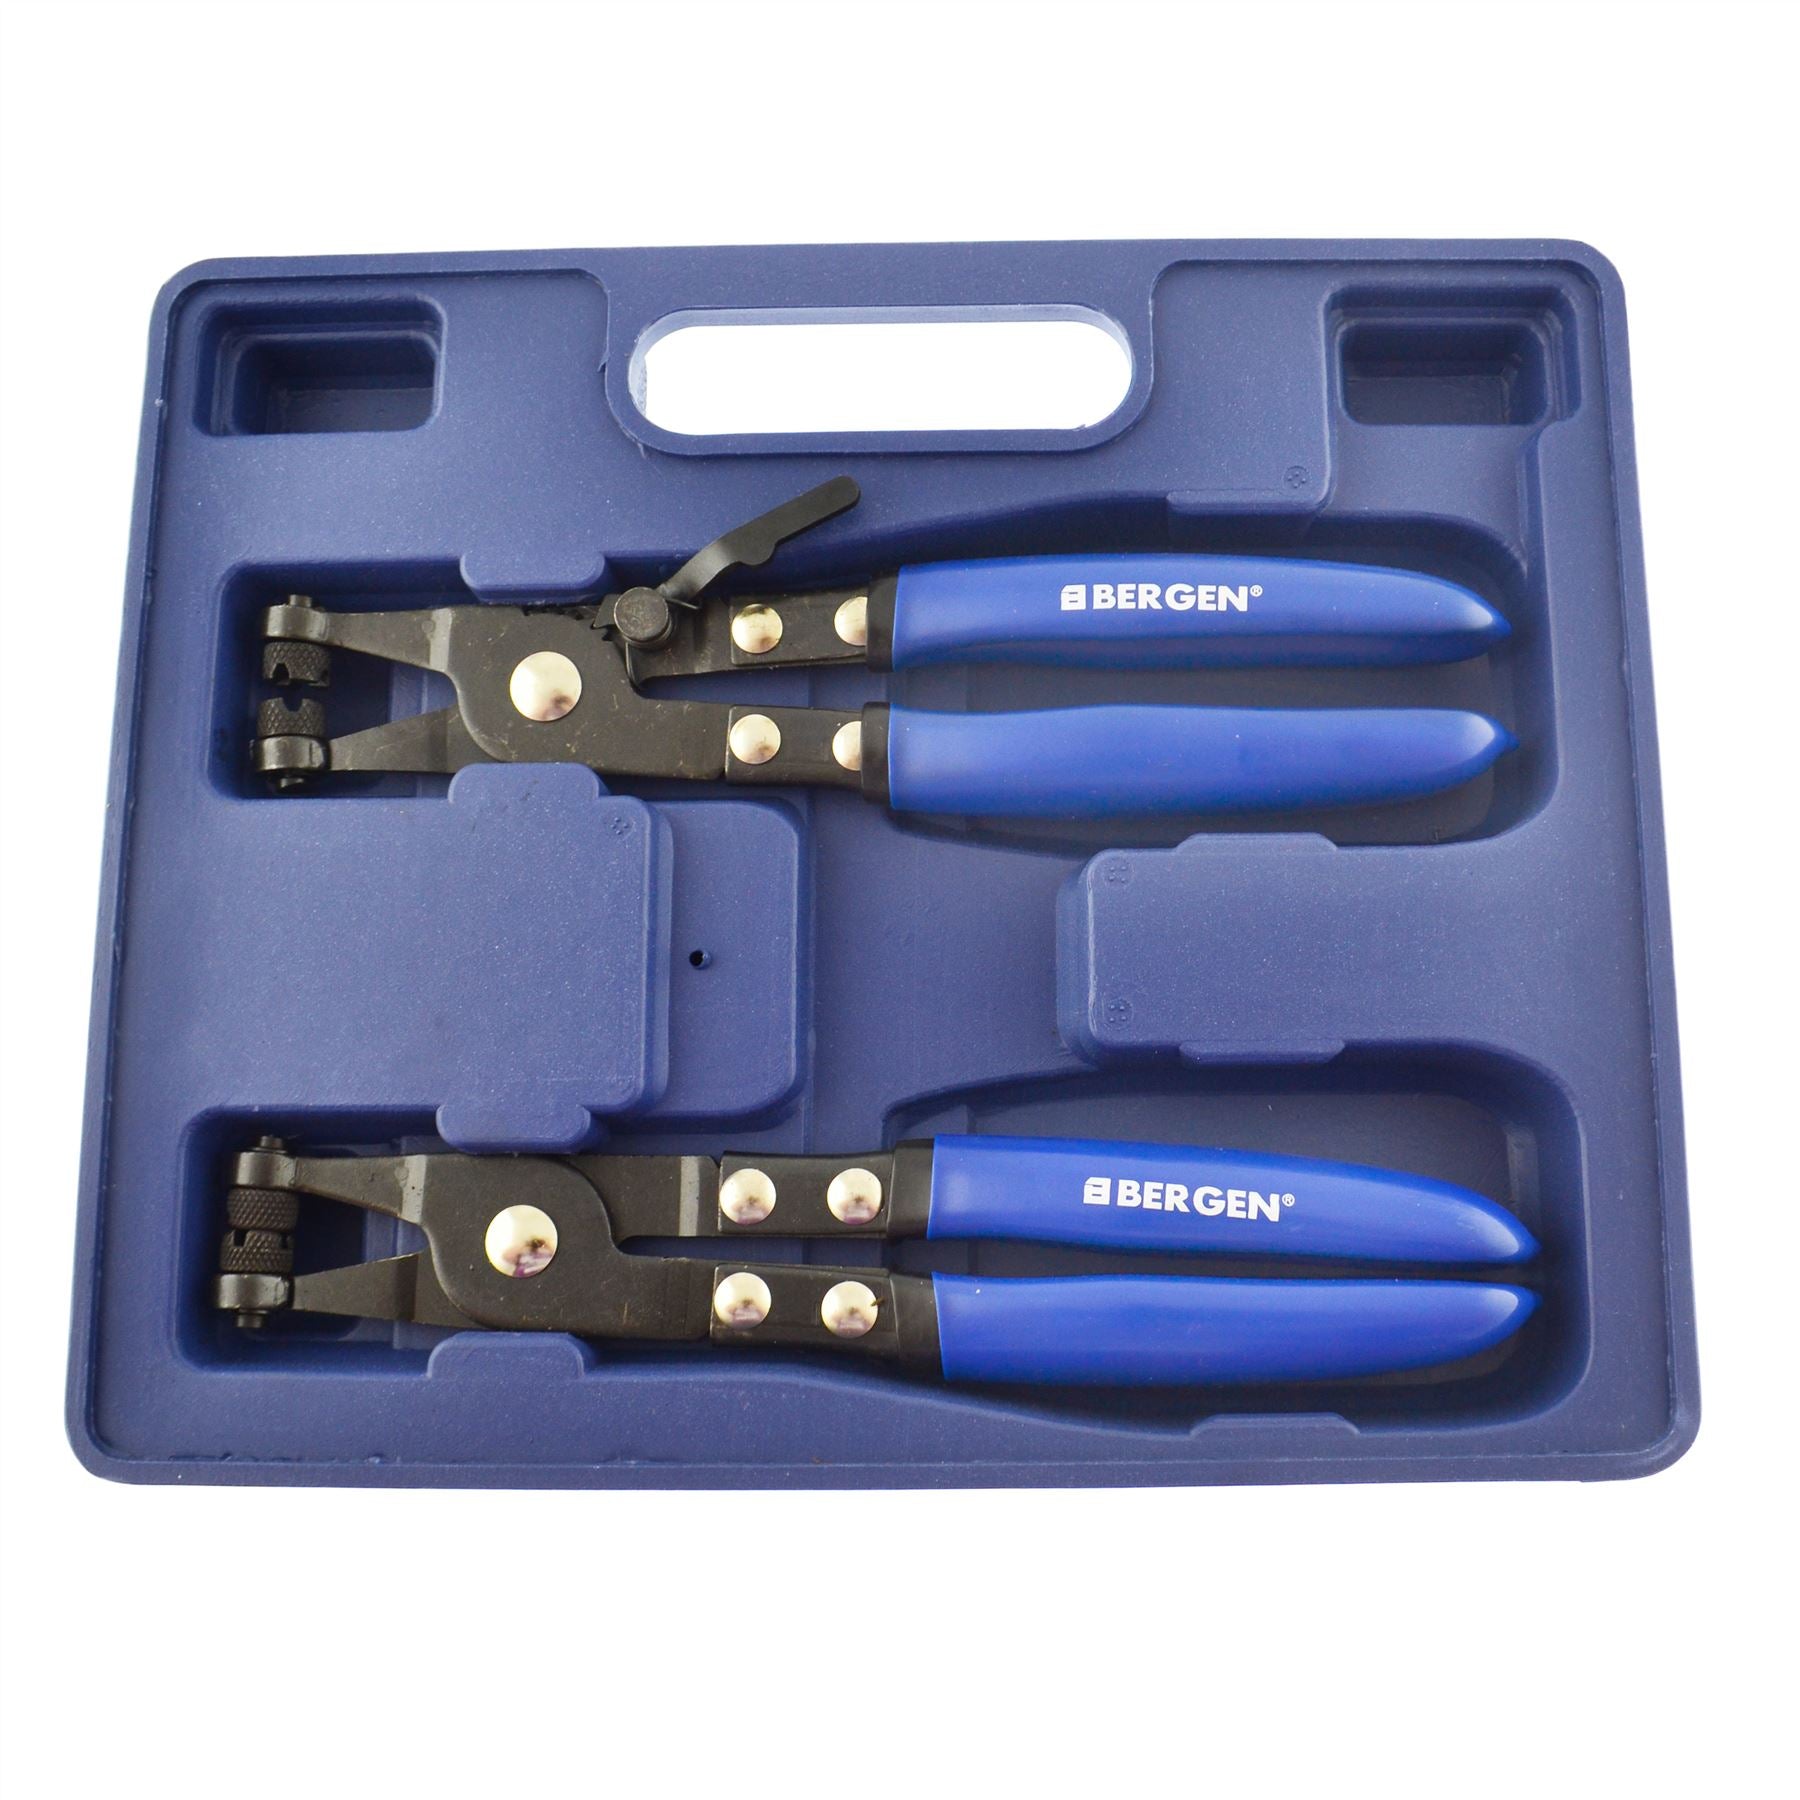 Hose Clamp Pliers Set 2 pc Removal Installation of Constant Tension Type Clamps